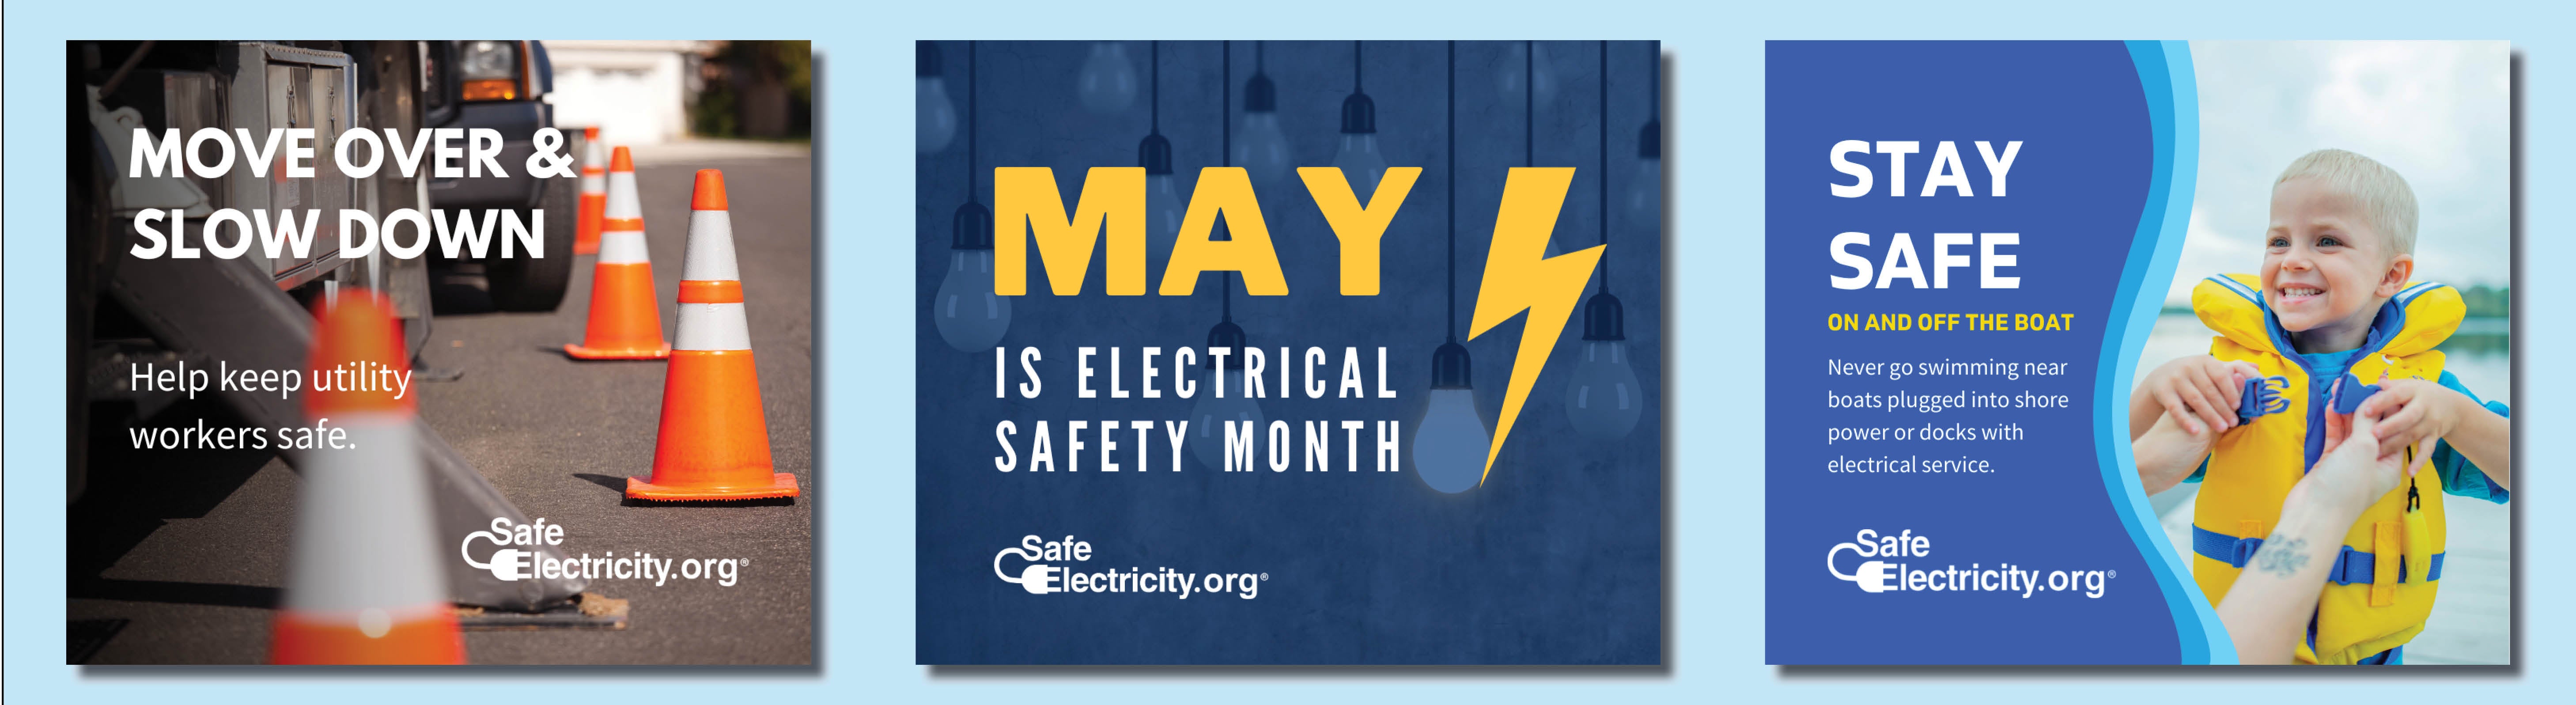 Move over & slow down for utility workers; May is electrical safety month; don't swim near boats plugged into shore power or docks with electrical service